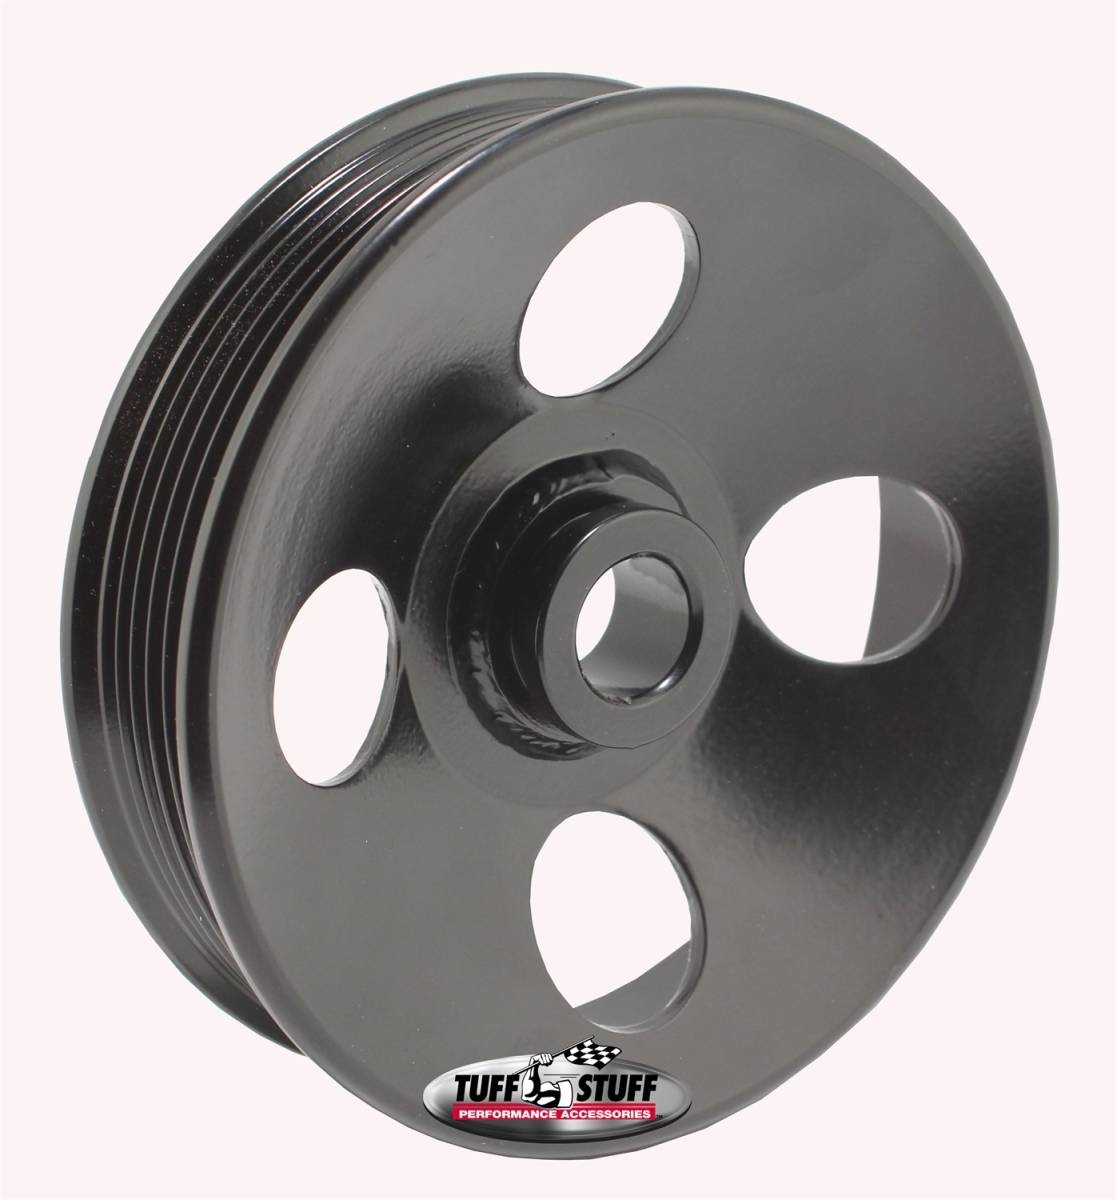 Tuff Stuff Performance - Type II Power Steering Pump Pulley For .663 in. Shaft 6-Groove Fits All Tuff Stuff Type II Pumps That Require A 17mm Press-On Pulley Black Powder Coated 8487B